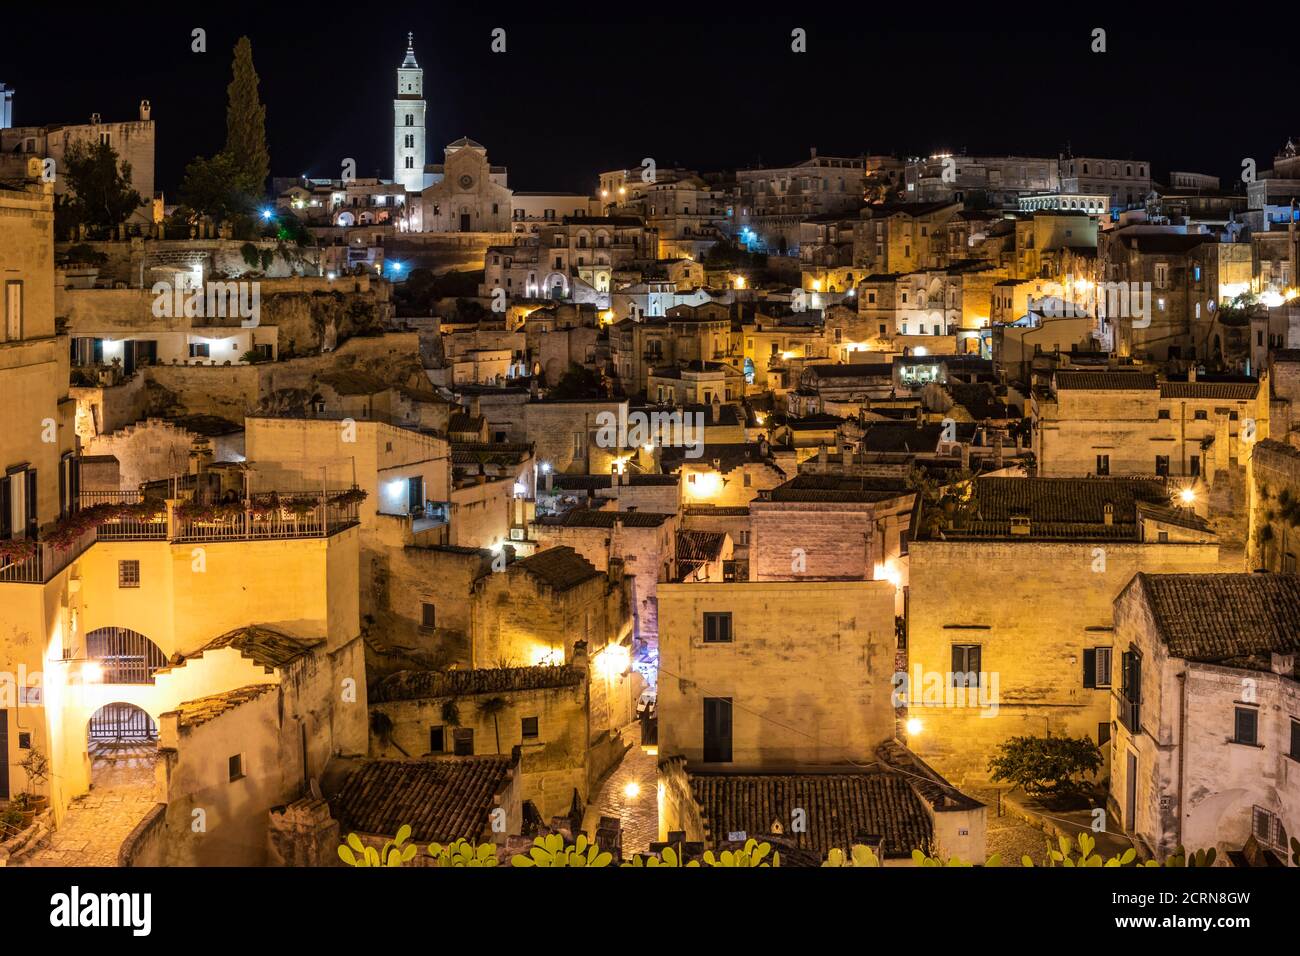 Matera, Basilicata, Italy - Panoramic view of the Sassi of Matera, Caveoso, at night. The ancient houses of stone and brick, carved into the rock. The Stock Photo